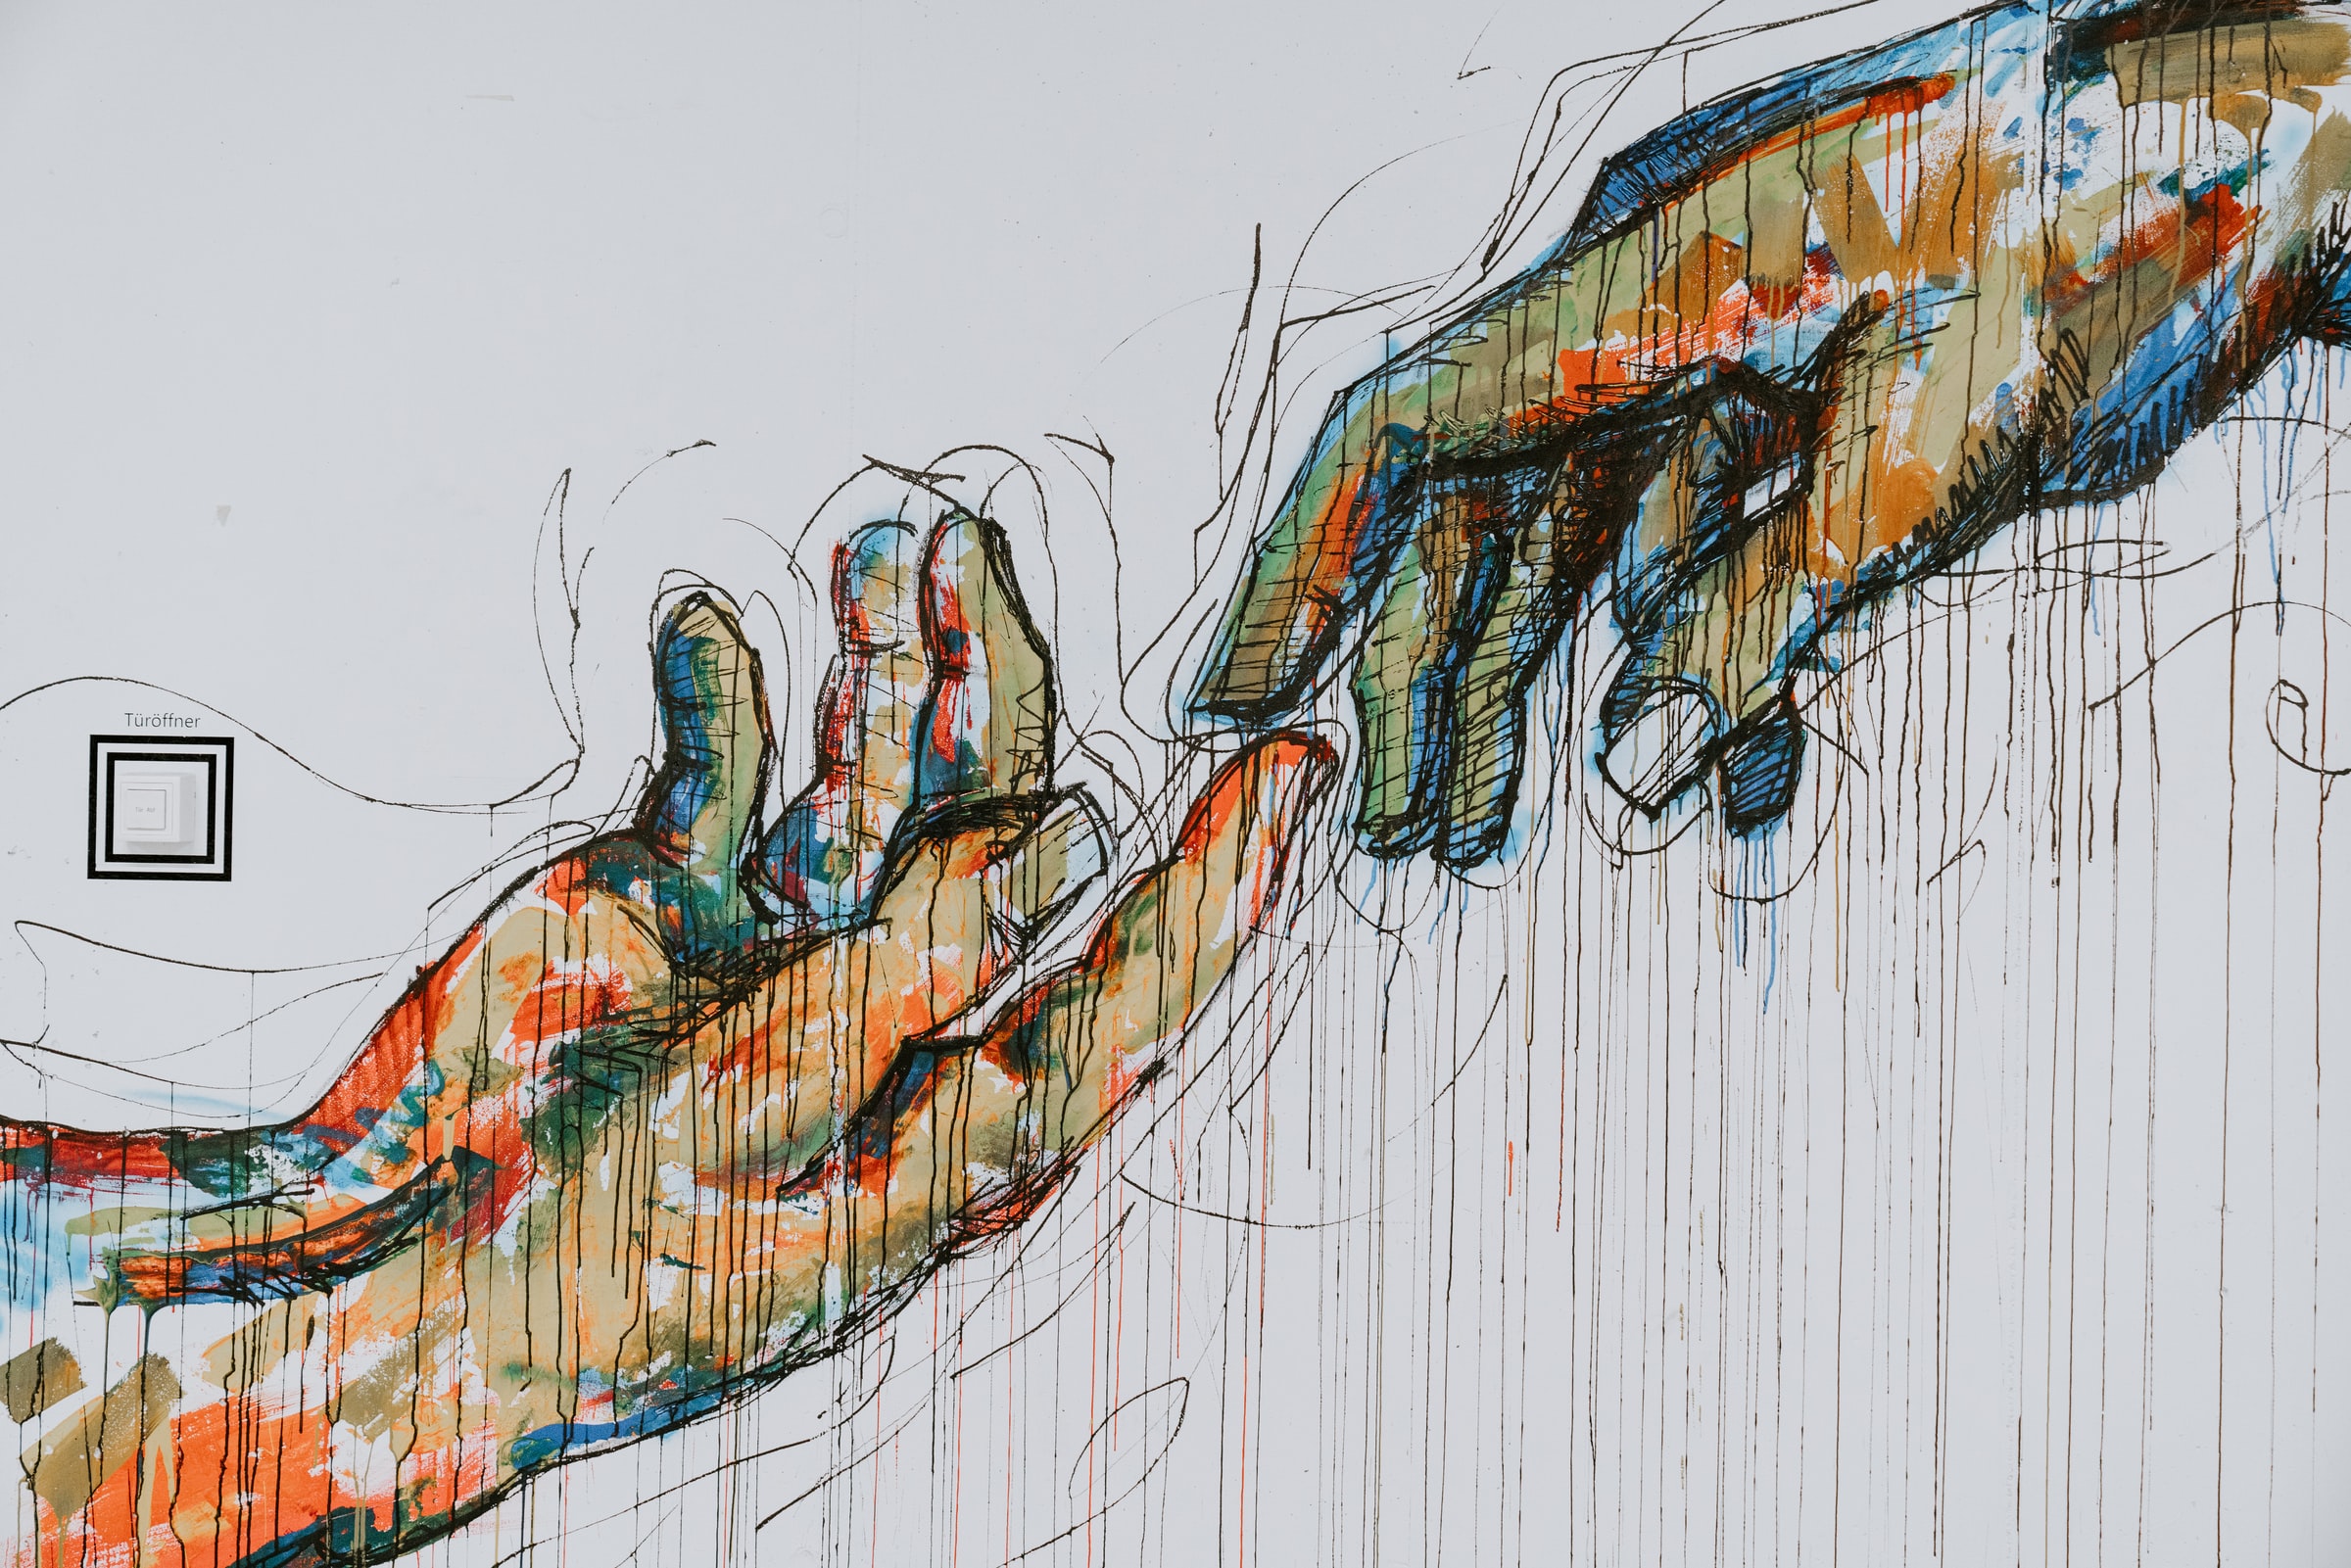 artistic depiction of hands touching